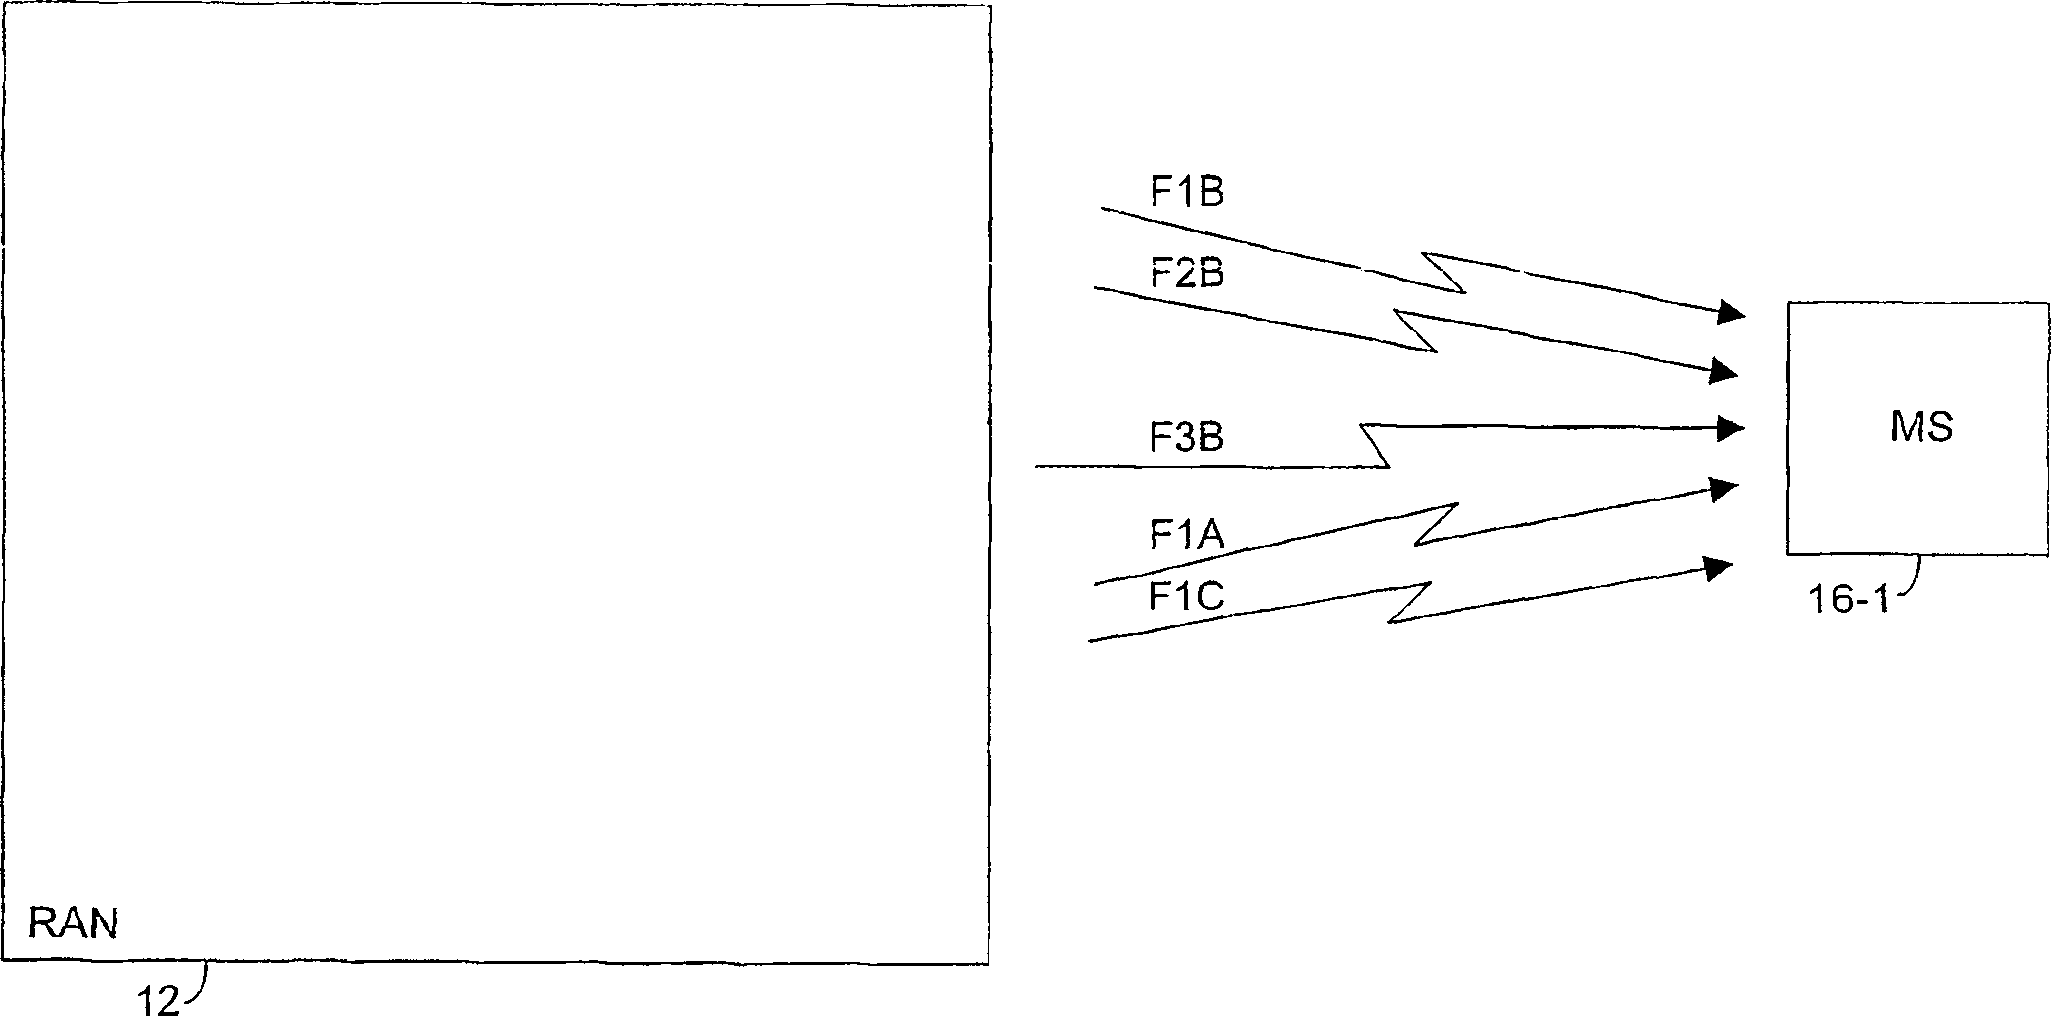 Resource granting in multi-carrier CDMA systems